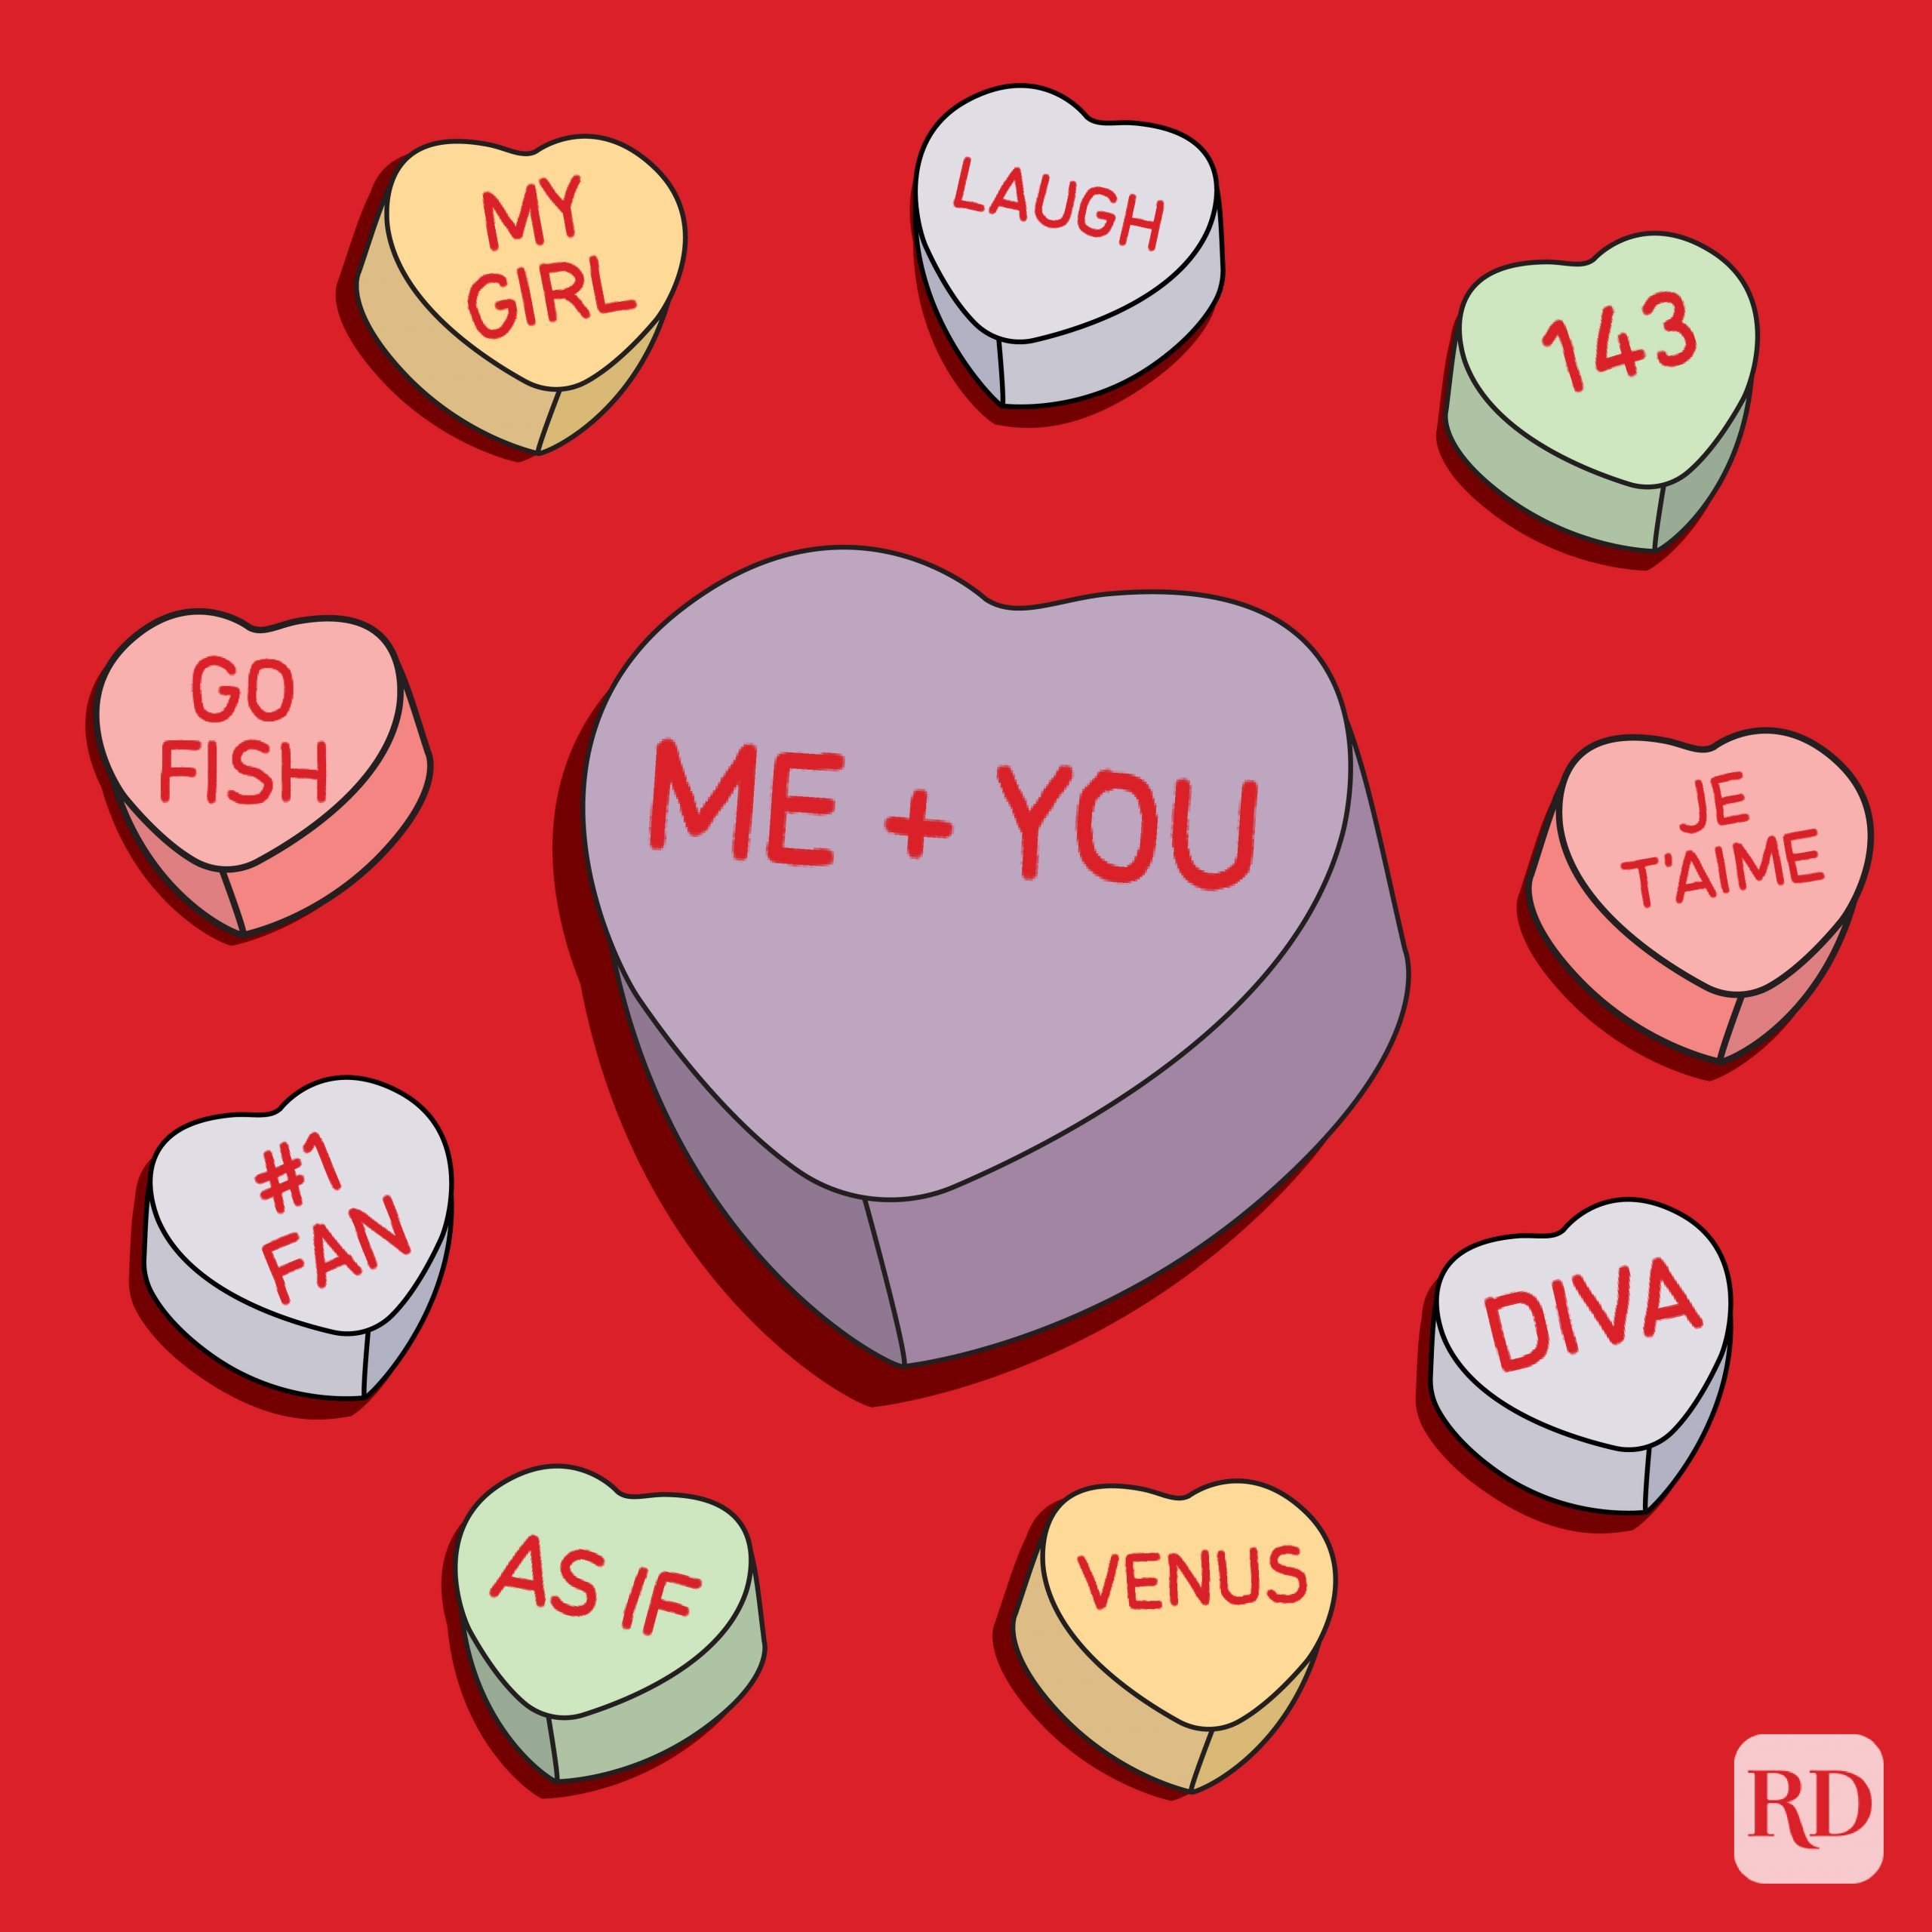 Candy Heart Sayings 2022: Conversation Heart Sayings for Valentine's Day